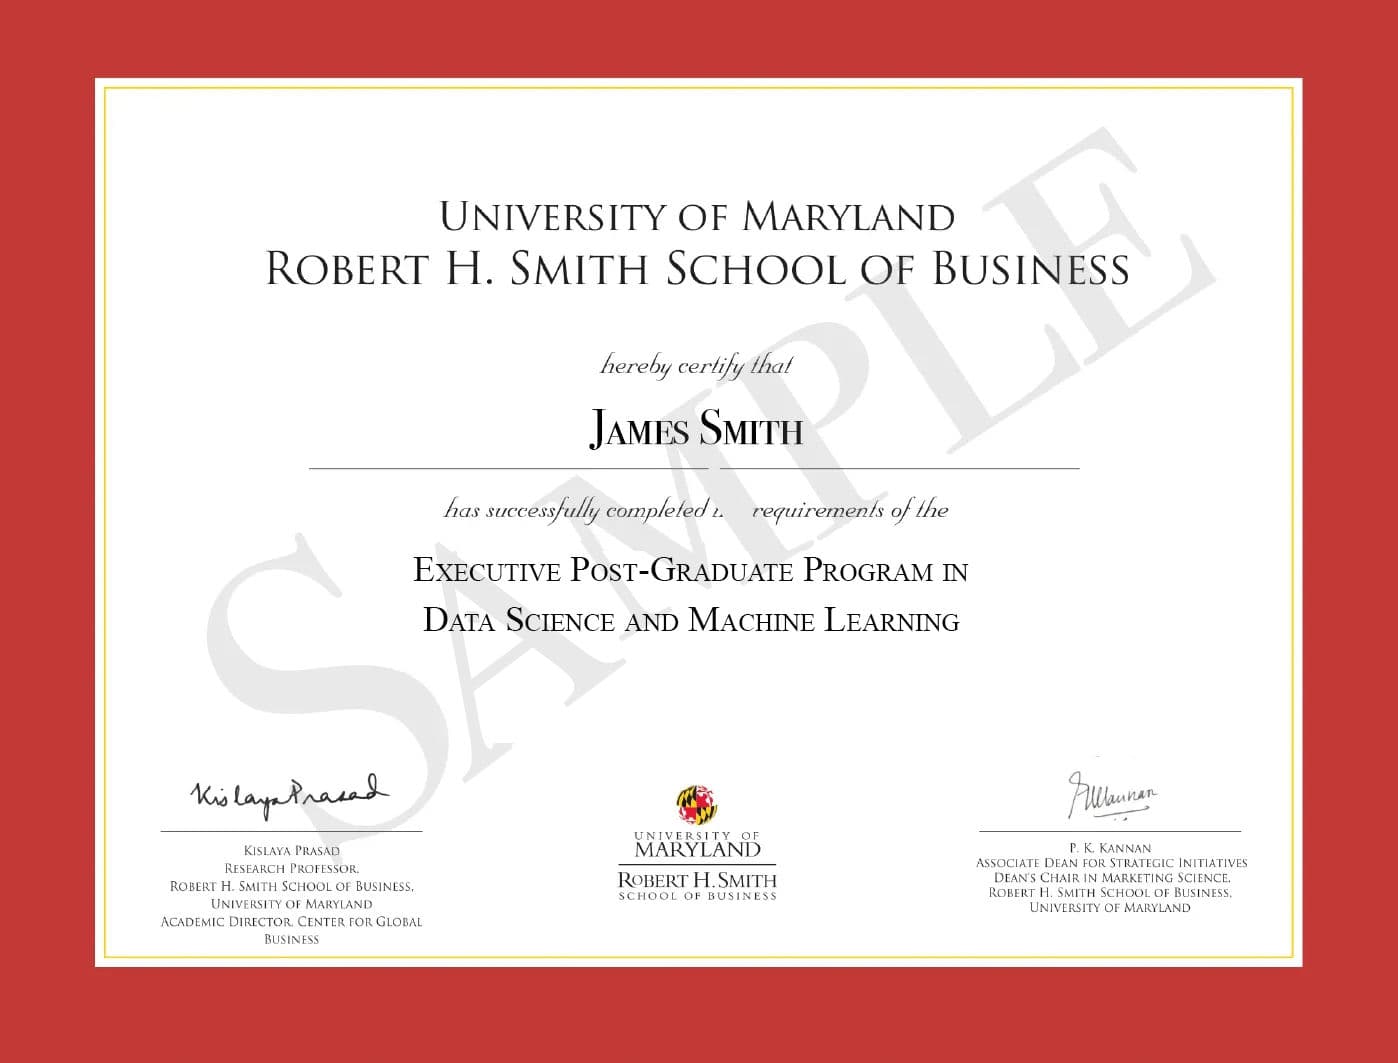 Upon successful completion of the Program, you receive a verified Executive Post-Graduate certificate from University of Maryland's Robert H. Smith School of Business